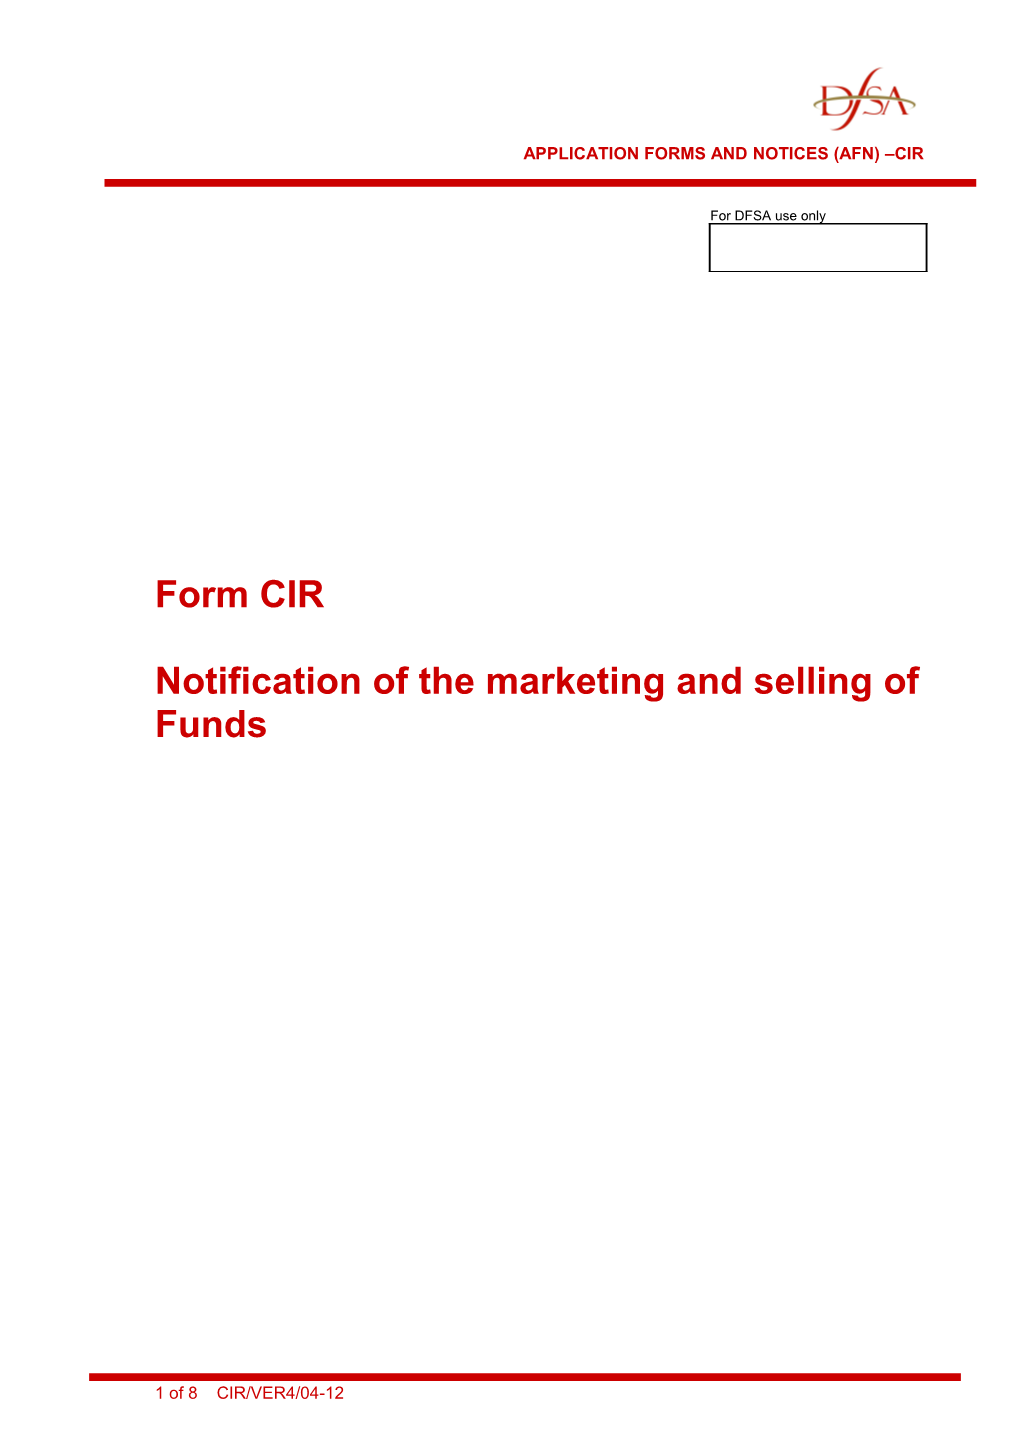 Notification of the Marketing and Selling of Funds